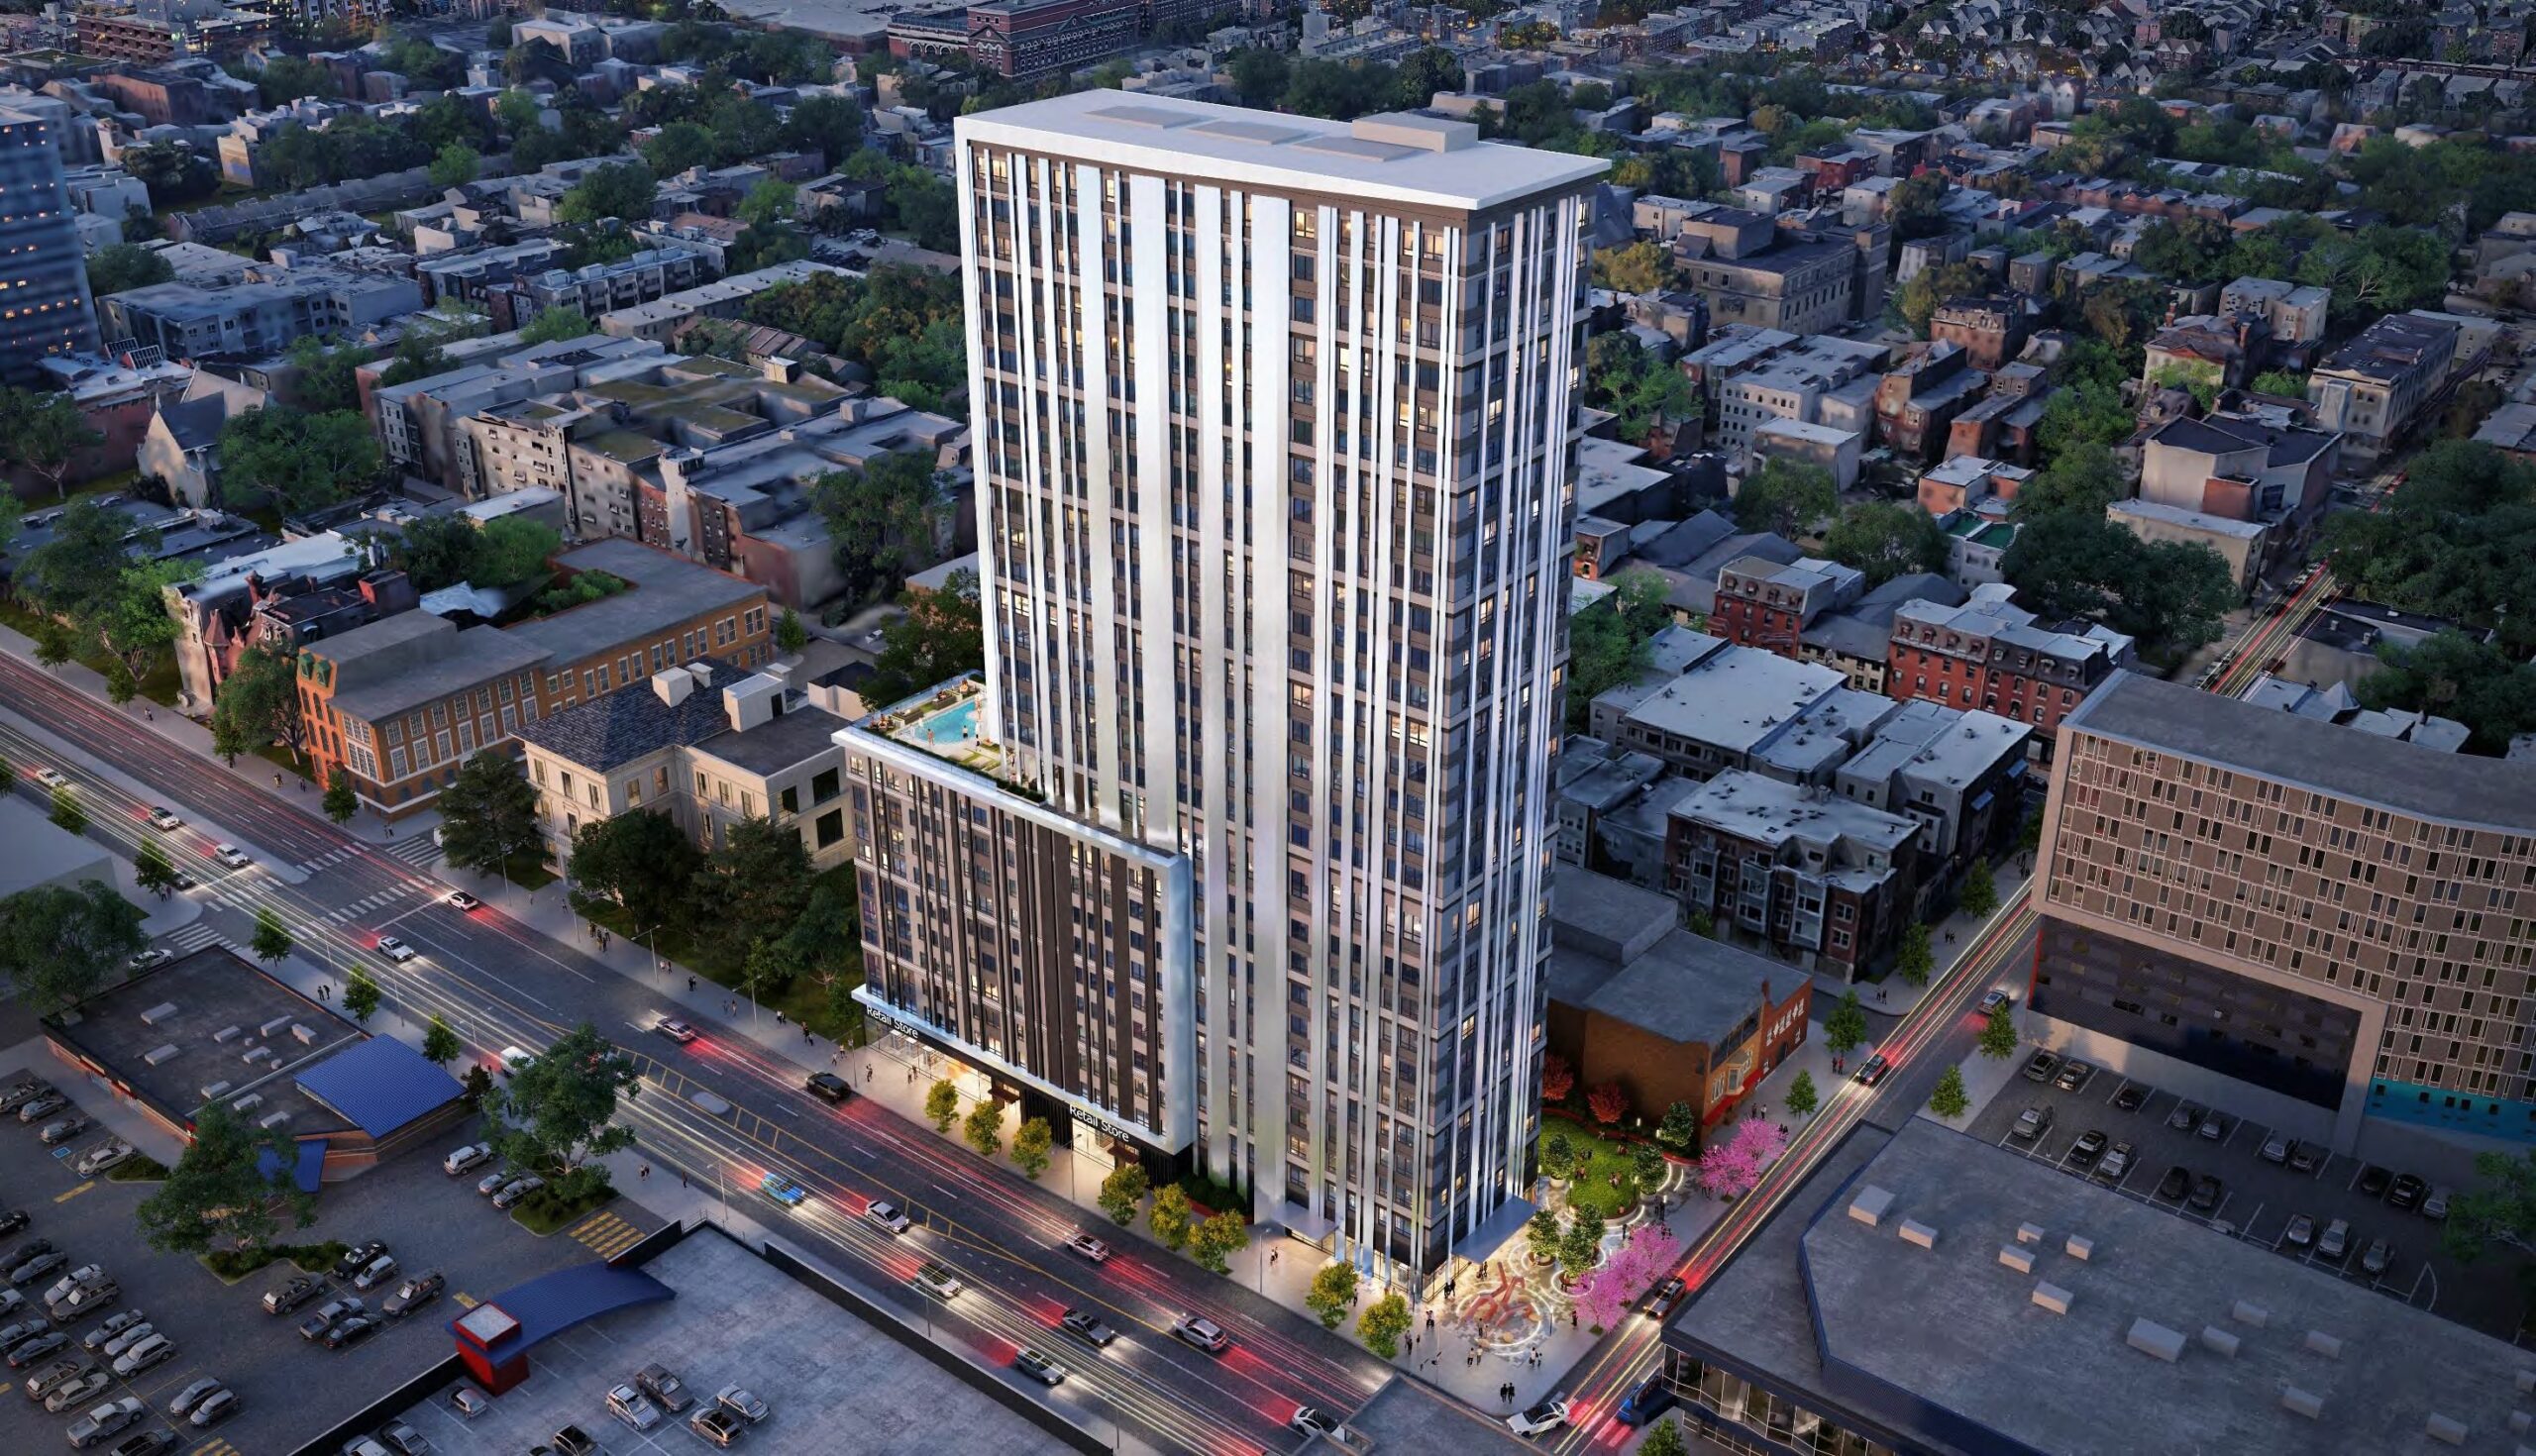 Legacy on Broad at 1518-28 North Broad Street. Building rendering. Credit: CUBE 3 Studio LLC via the Civic Design Review